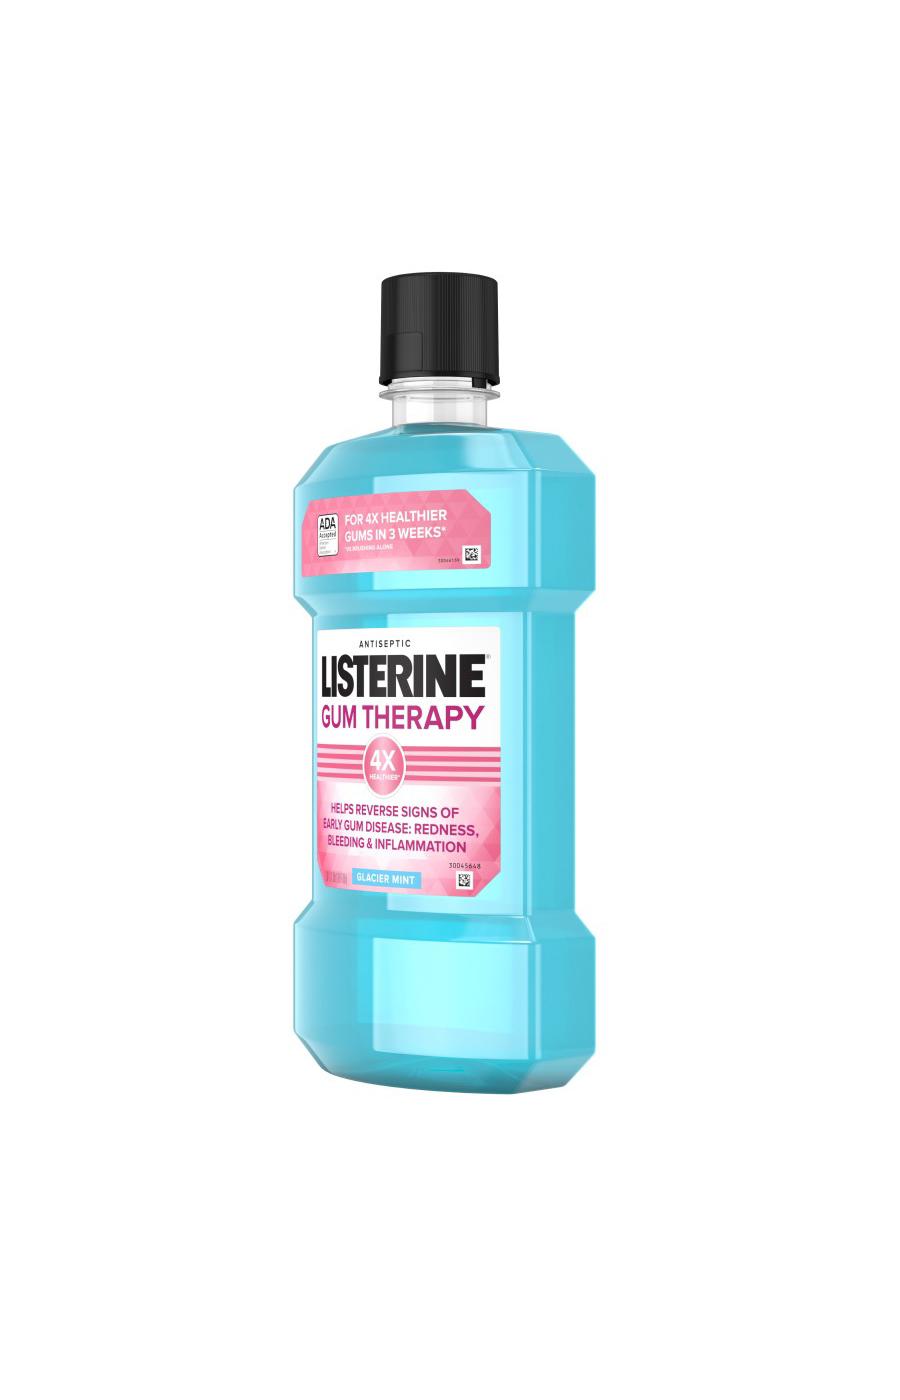 Listerine Gum Therapy Antiseptic Mouthwash, Glacier Mint; image 4 of 5